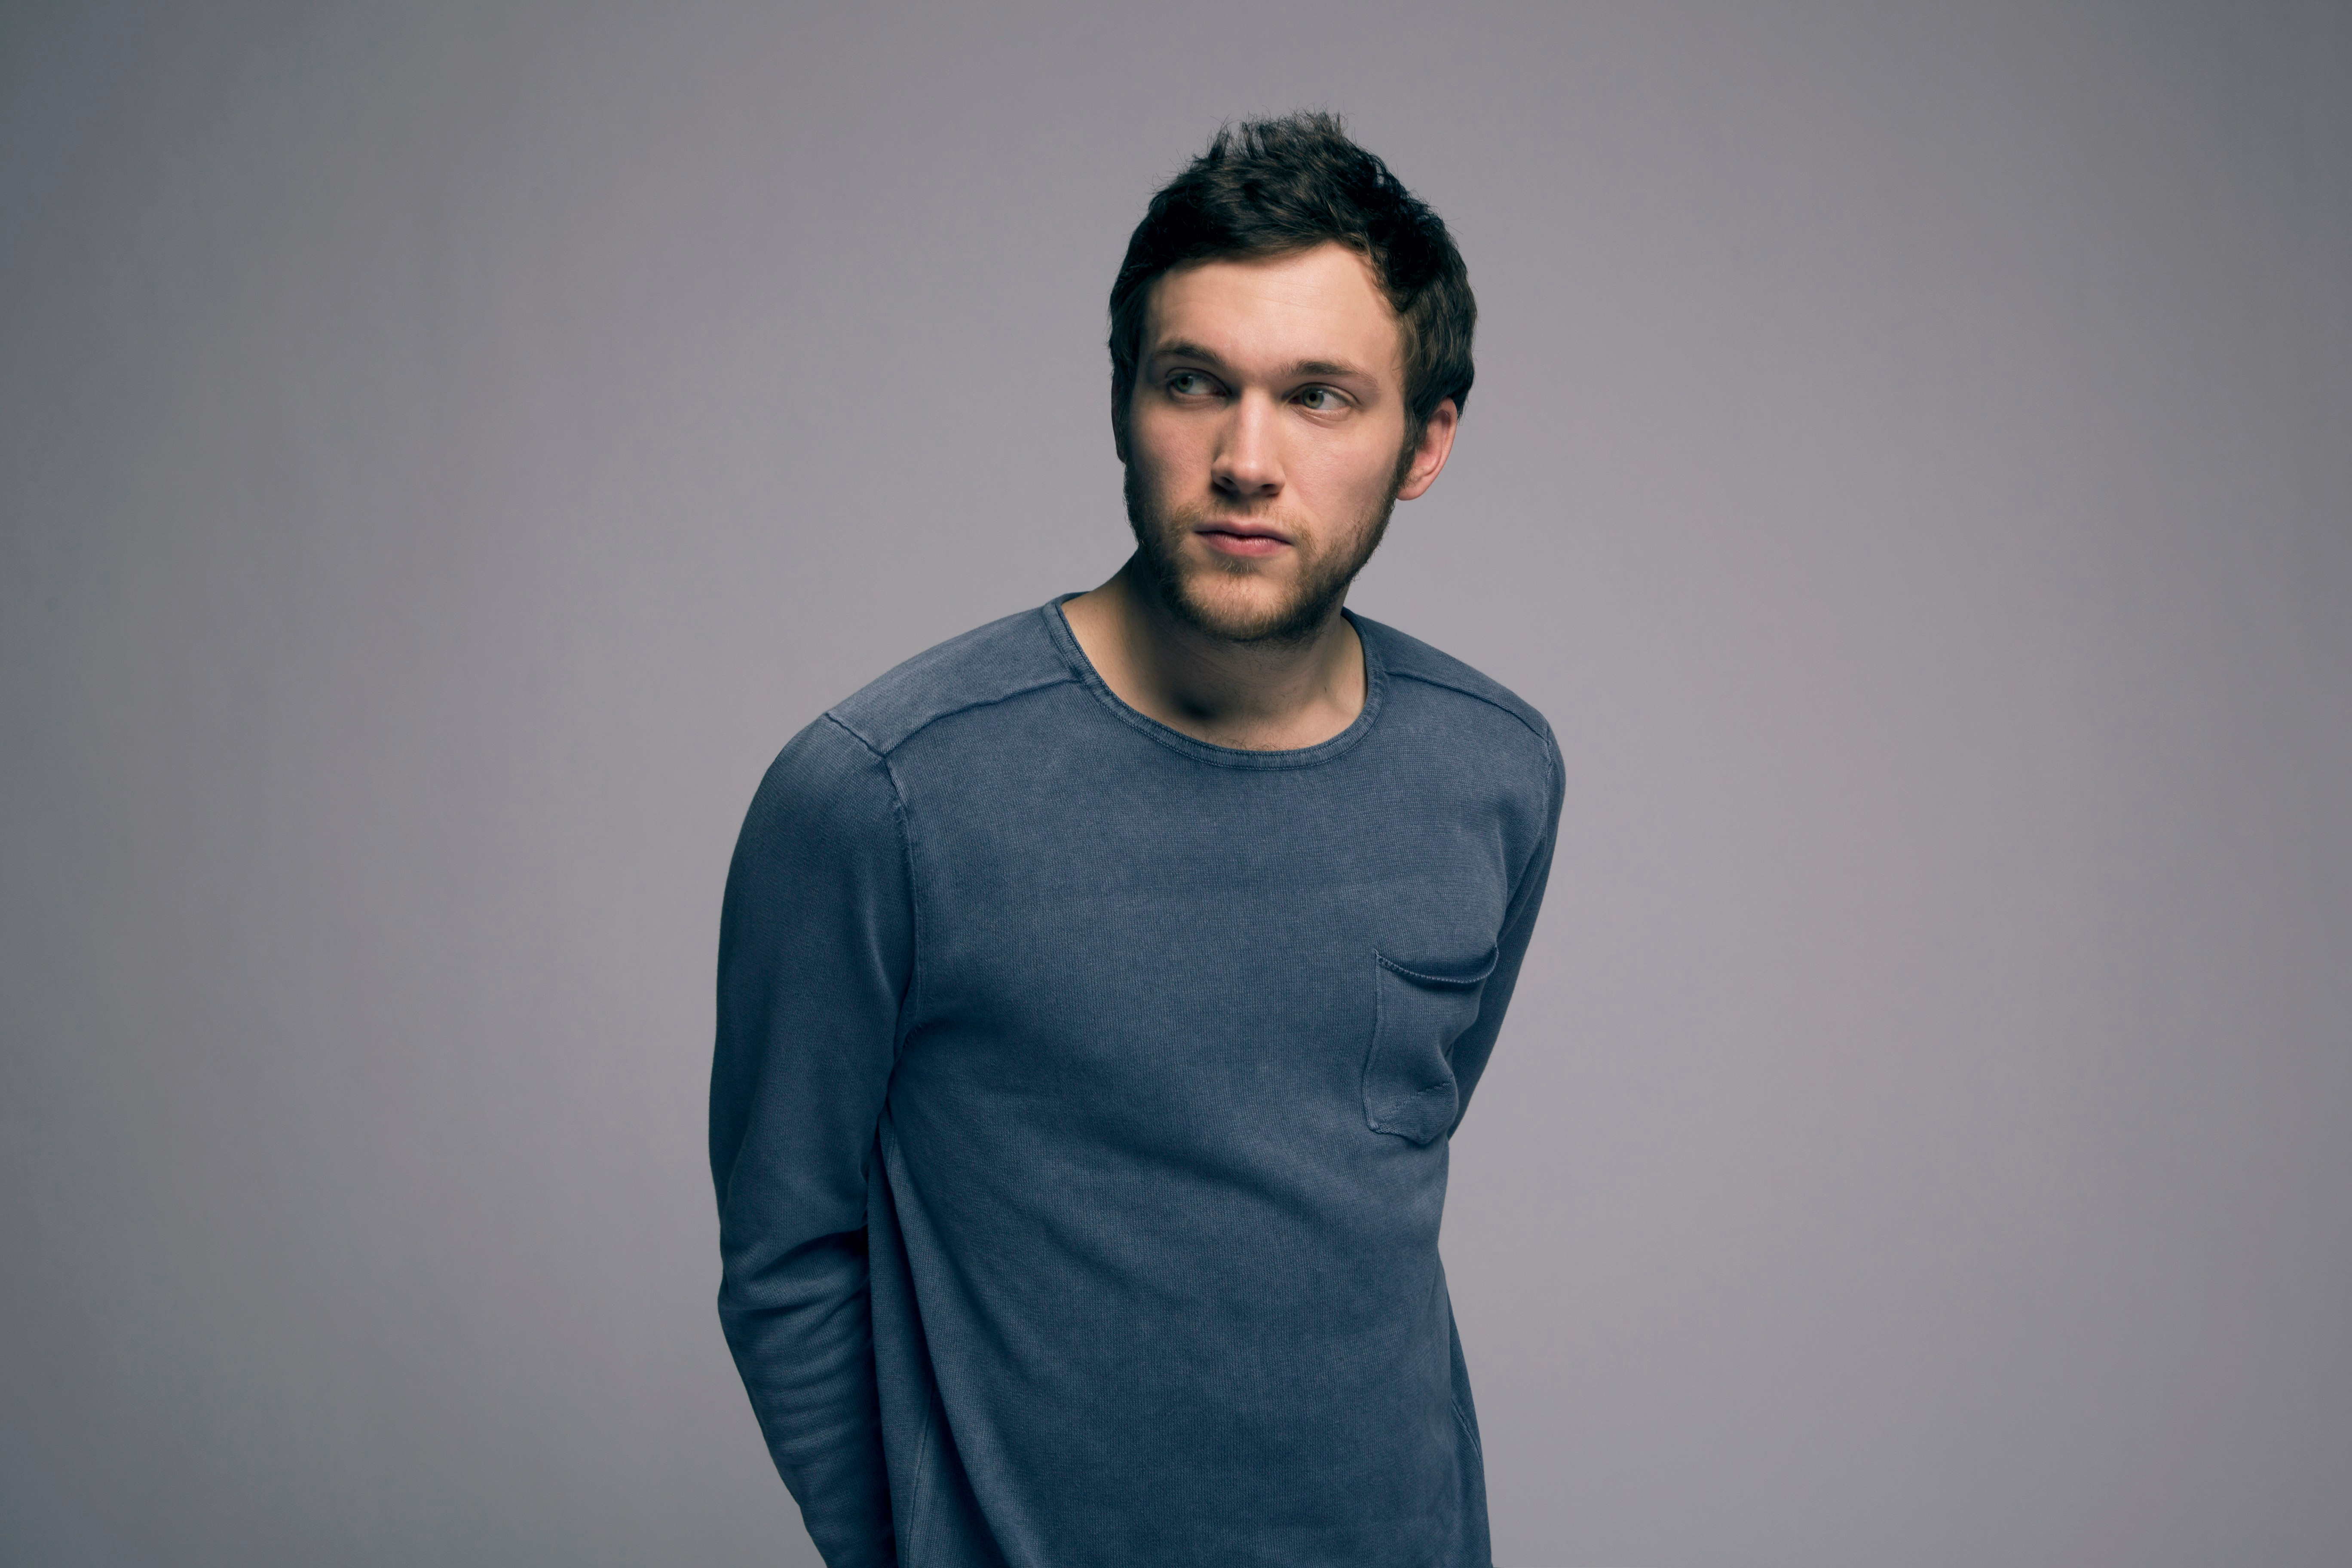 Amazing Phillip Phillips Pictures & Backgrounds